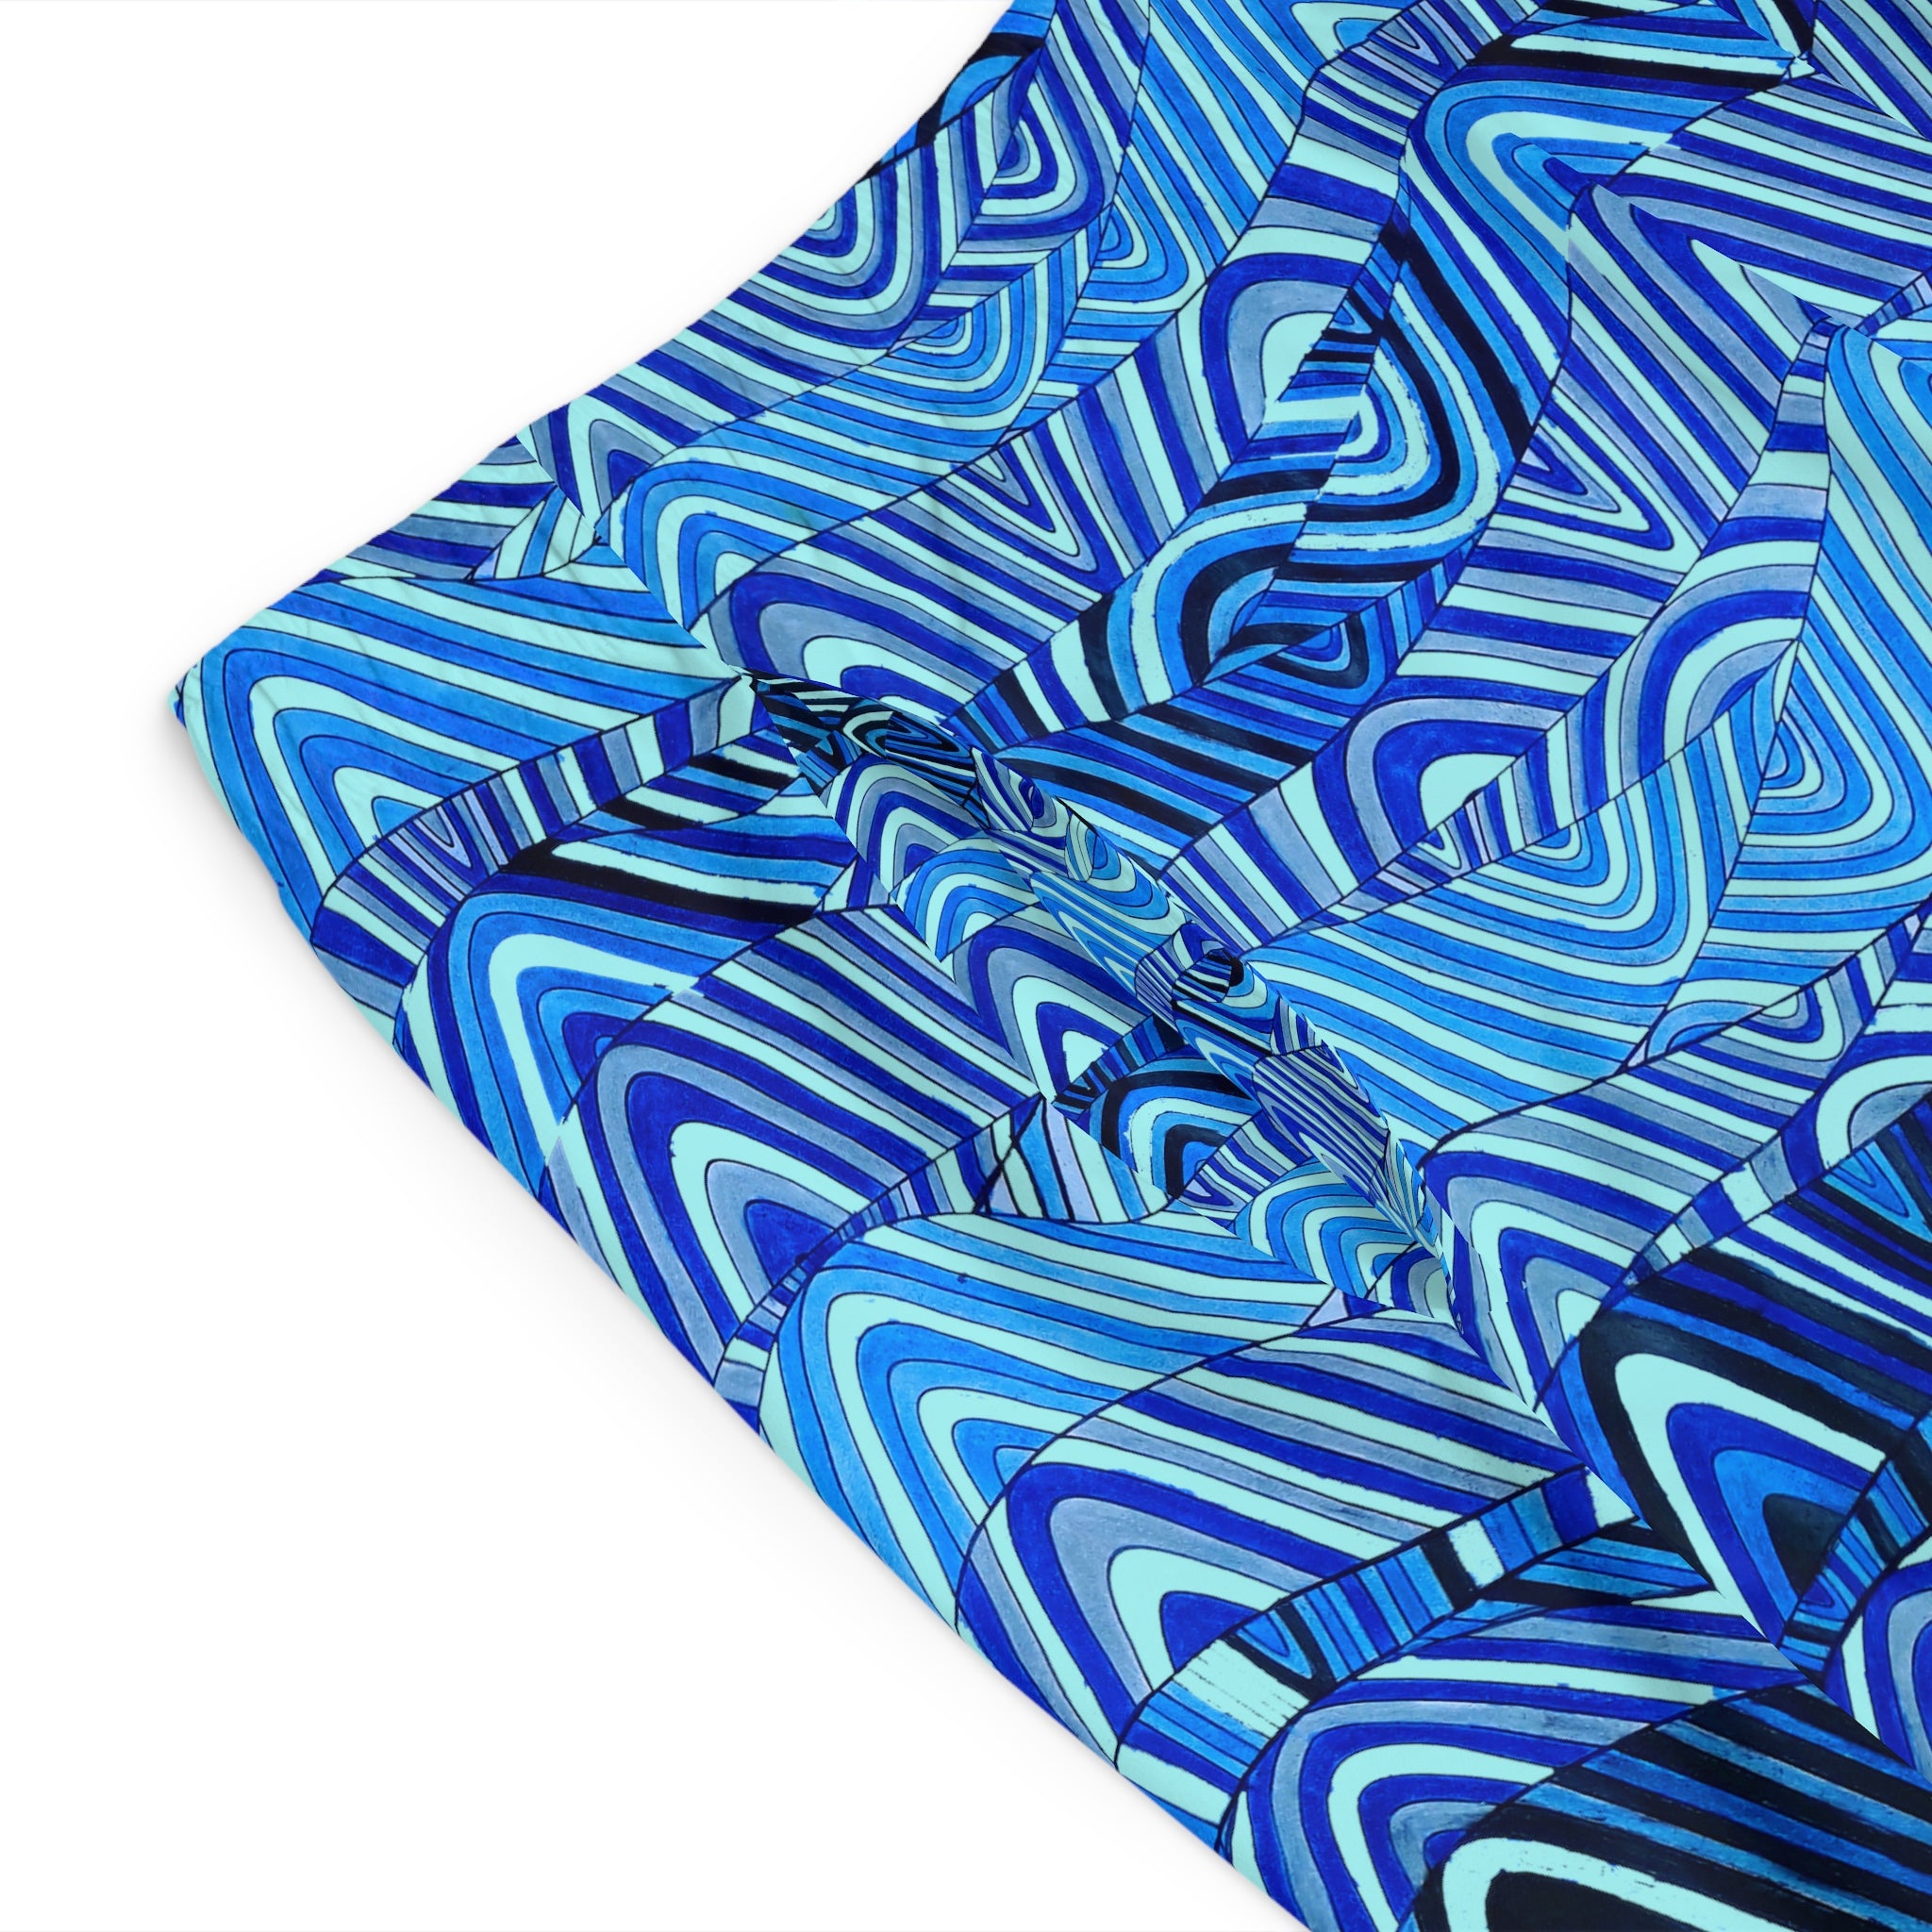 icy blue sonic waves print board shorts for men